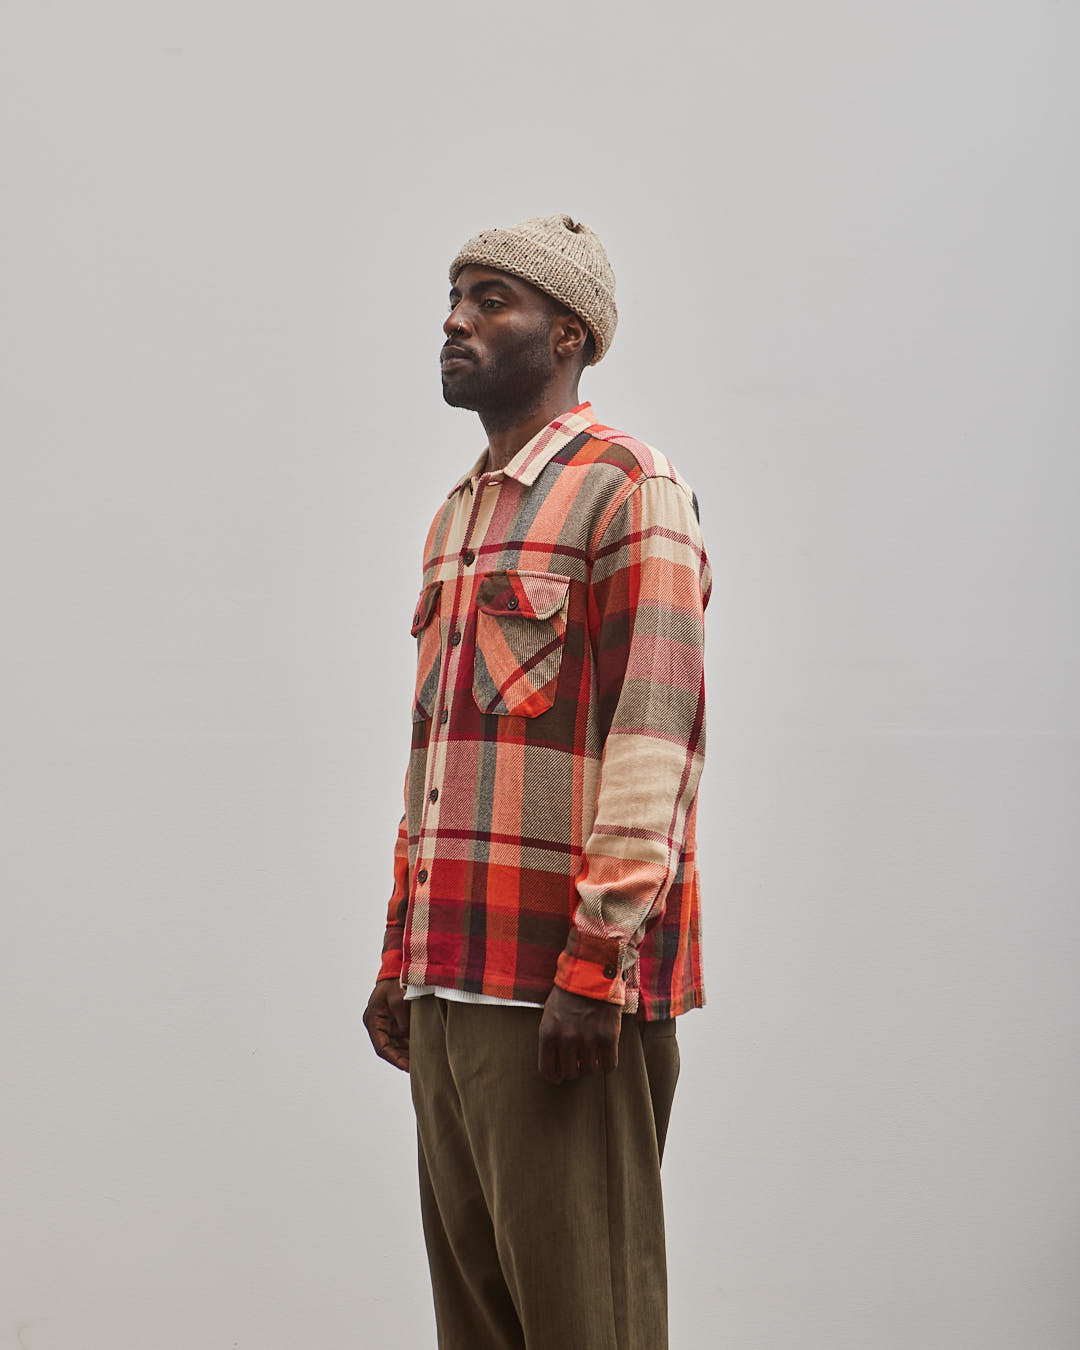 Universal Works L/S Utility Shirt, Red Check